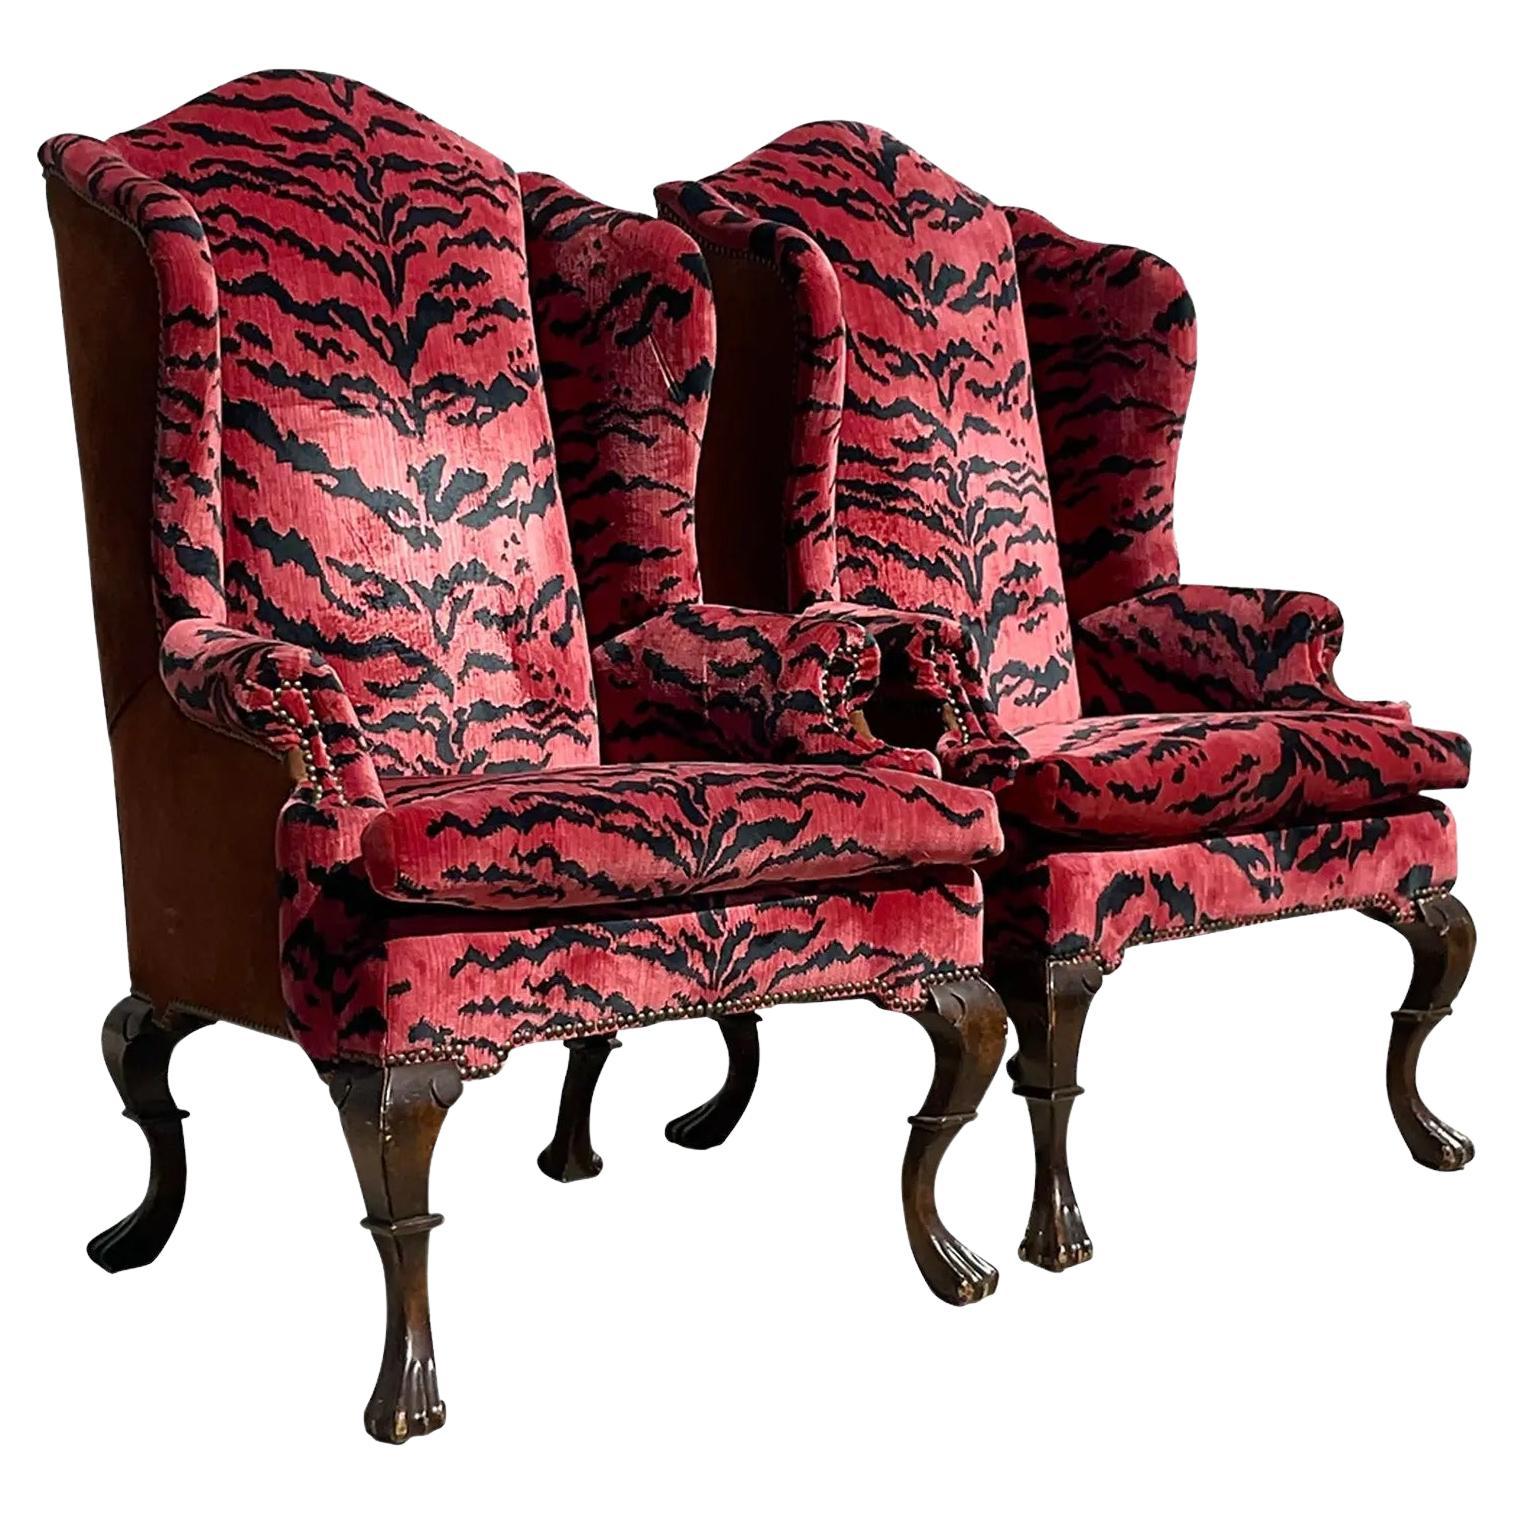 Vintage Regency Scalamandre “Le Tigre” Velvet and Suede Wingback Chairs, a Pair